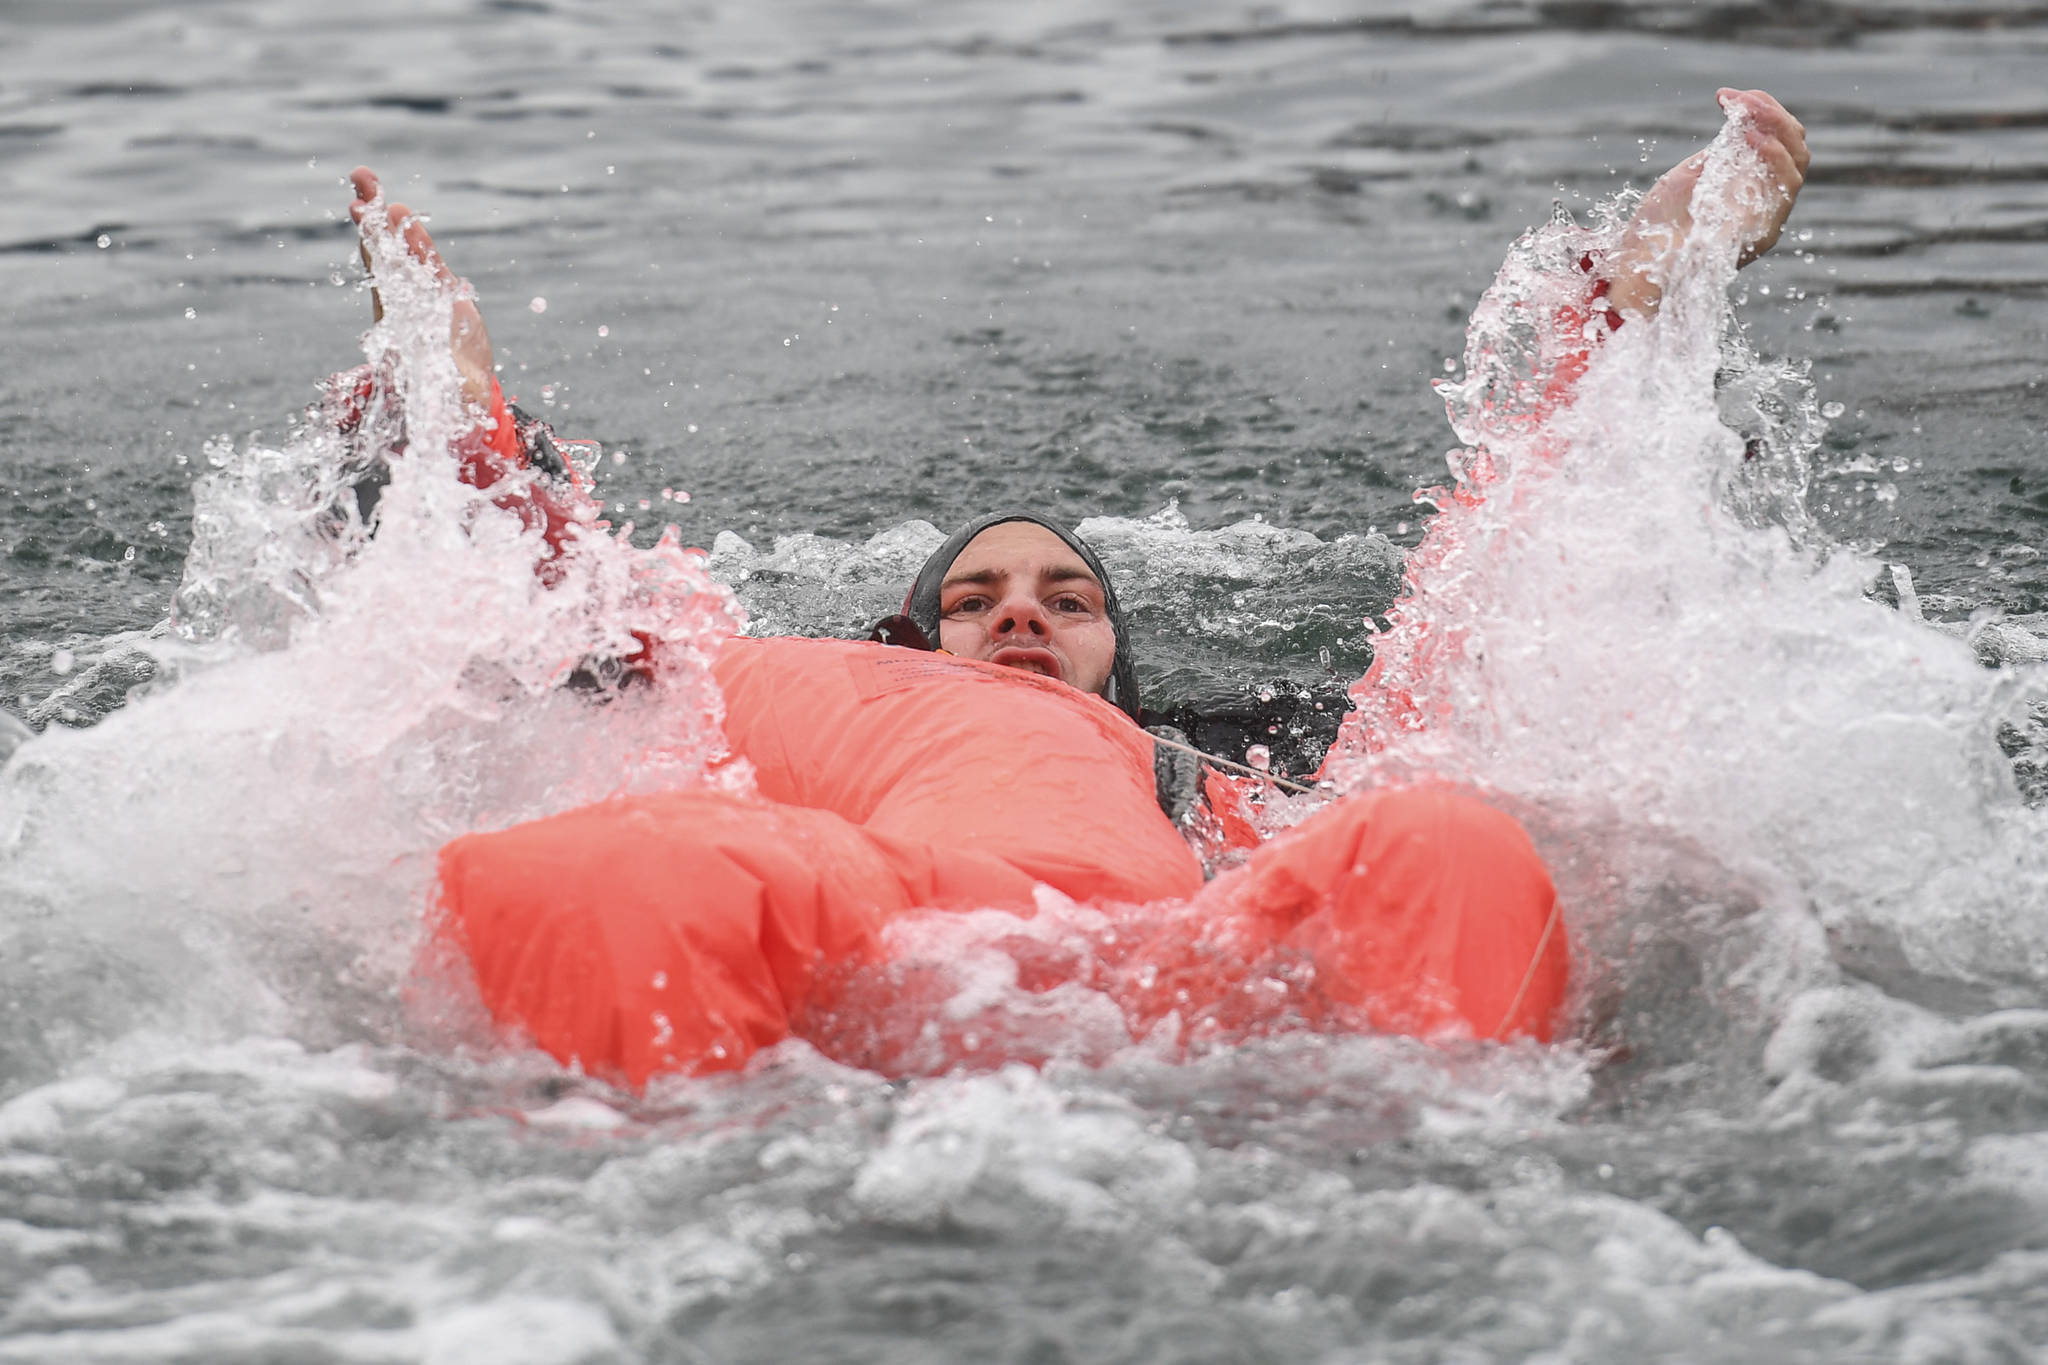 Brett Hyde, of the U.S. Army Dive Team, competes in the survival suit swim during the annual Buoy Tender Olympics at Station Juneau on Wednesday, Aug. 21, 2019. (Michael Penn | Juneau Empire)